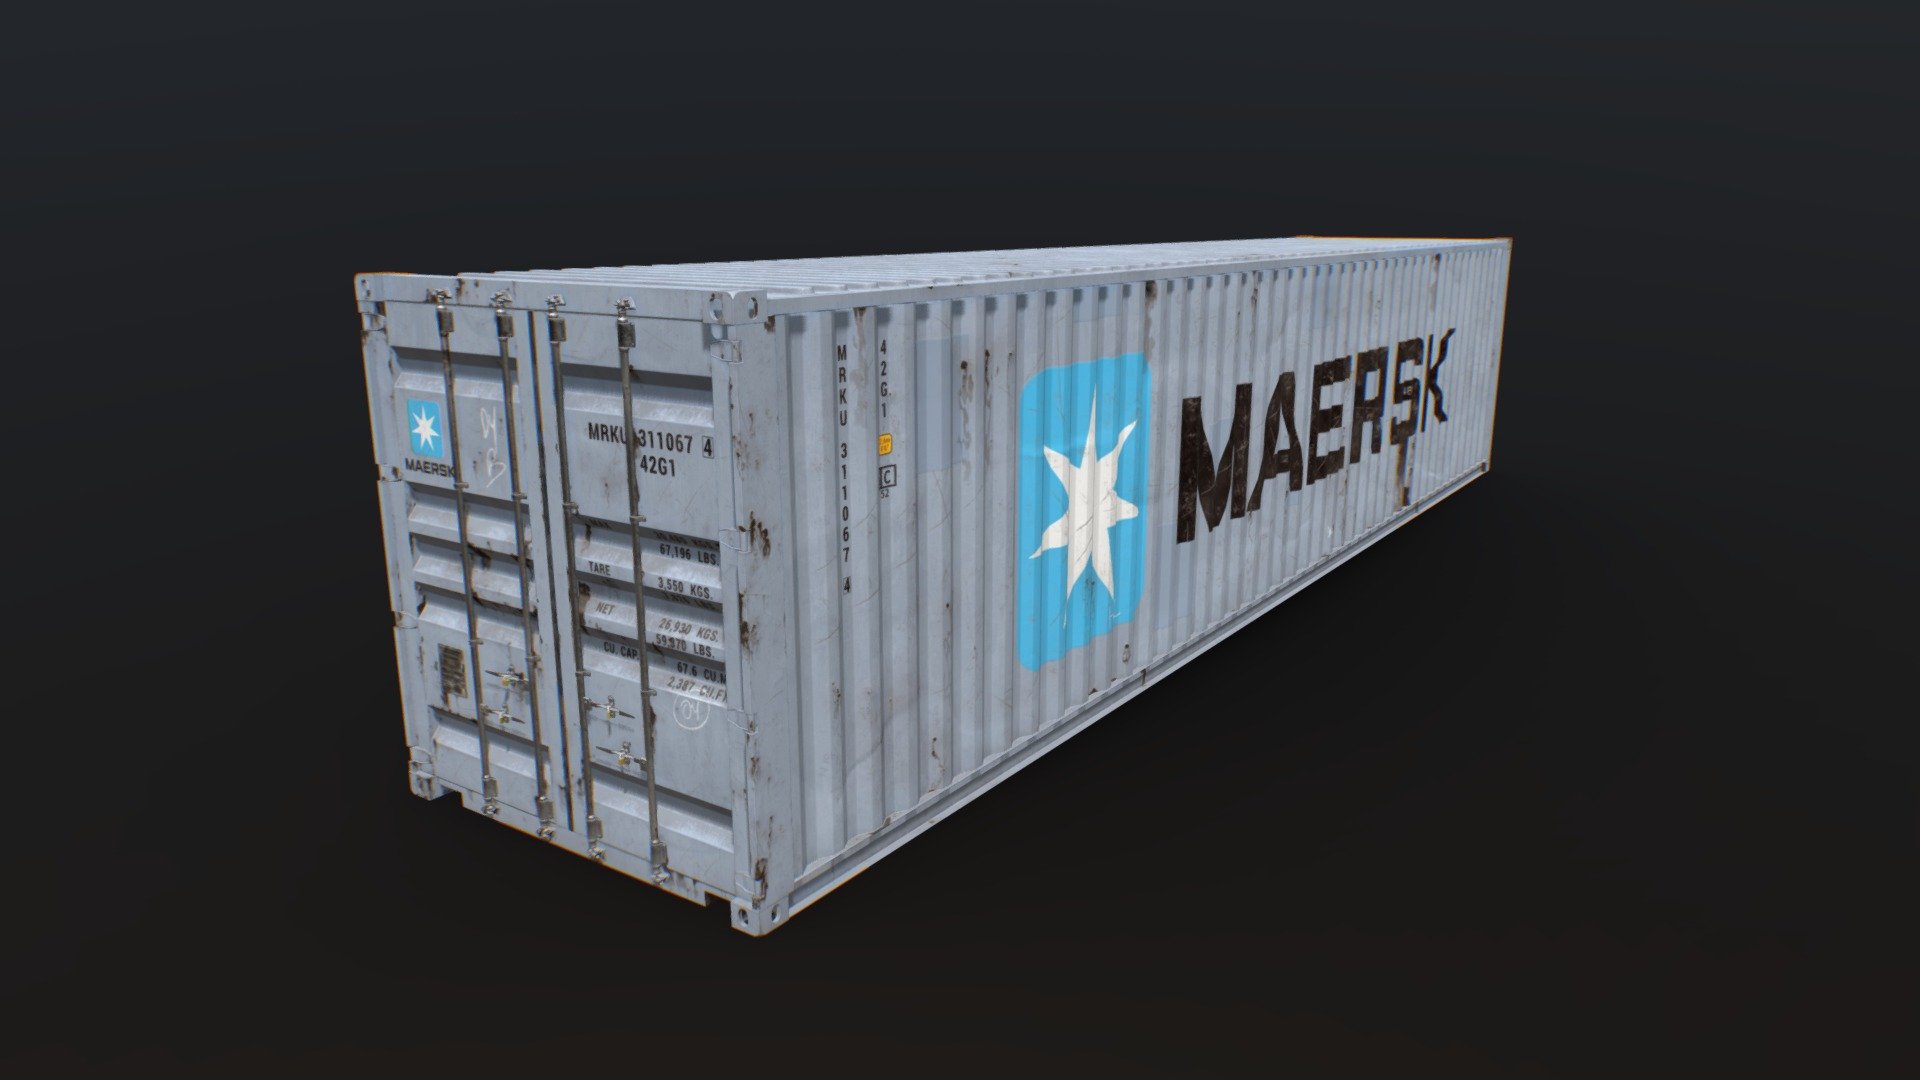 Detailed 40 ft Shipping Container with Interior.


Nine different texture sets. Maersk (New/Used/Rusty). Evergreen (New/Used/Rusty). Nondescript (New/Used/Rusty).
Includes Color Mask for each texture set, which masks out the rust, logos, and labels.
All geometry is subdivision ready.
Fully unwrapped, non-overlapping UV's.
Polygon selections and Vertex Color tags for all sub-parts.
No N-gons, Isolated Vertices, or Complex Poles.

[Files Included]

_SPP - Substance Painter project files.

_TEX - Textures are 4K jpg files.

_C4D_Octane - Cinema 4D project file with Octane shaders.

_ORBX - Octane Standalone Package.

_C4D - Cinema 4D project file.

_FBX - Autodesk FBX.

_OBJ - OBJ/MTL.

_E3D - Video Copilot's Element 3D.

_MAX - 3ds Max project file.

Extra formats: .dae (Collada), .usdz (Pixar/Apple AR), .gltf/.glb (Khronos Group), .uasset (Unreal Engine).

For 8K textures message me 3d model